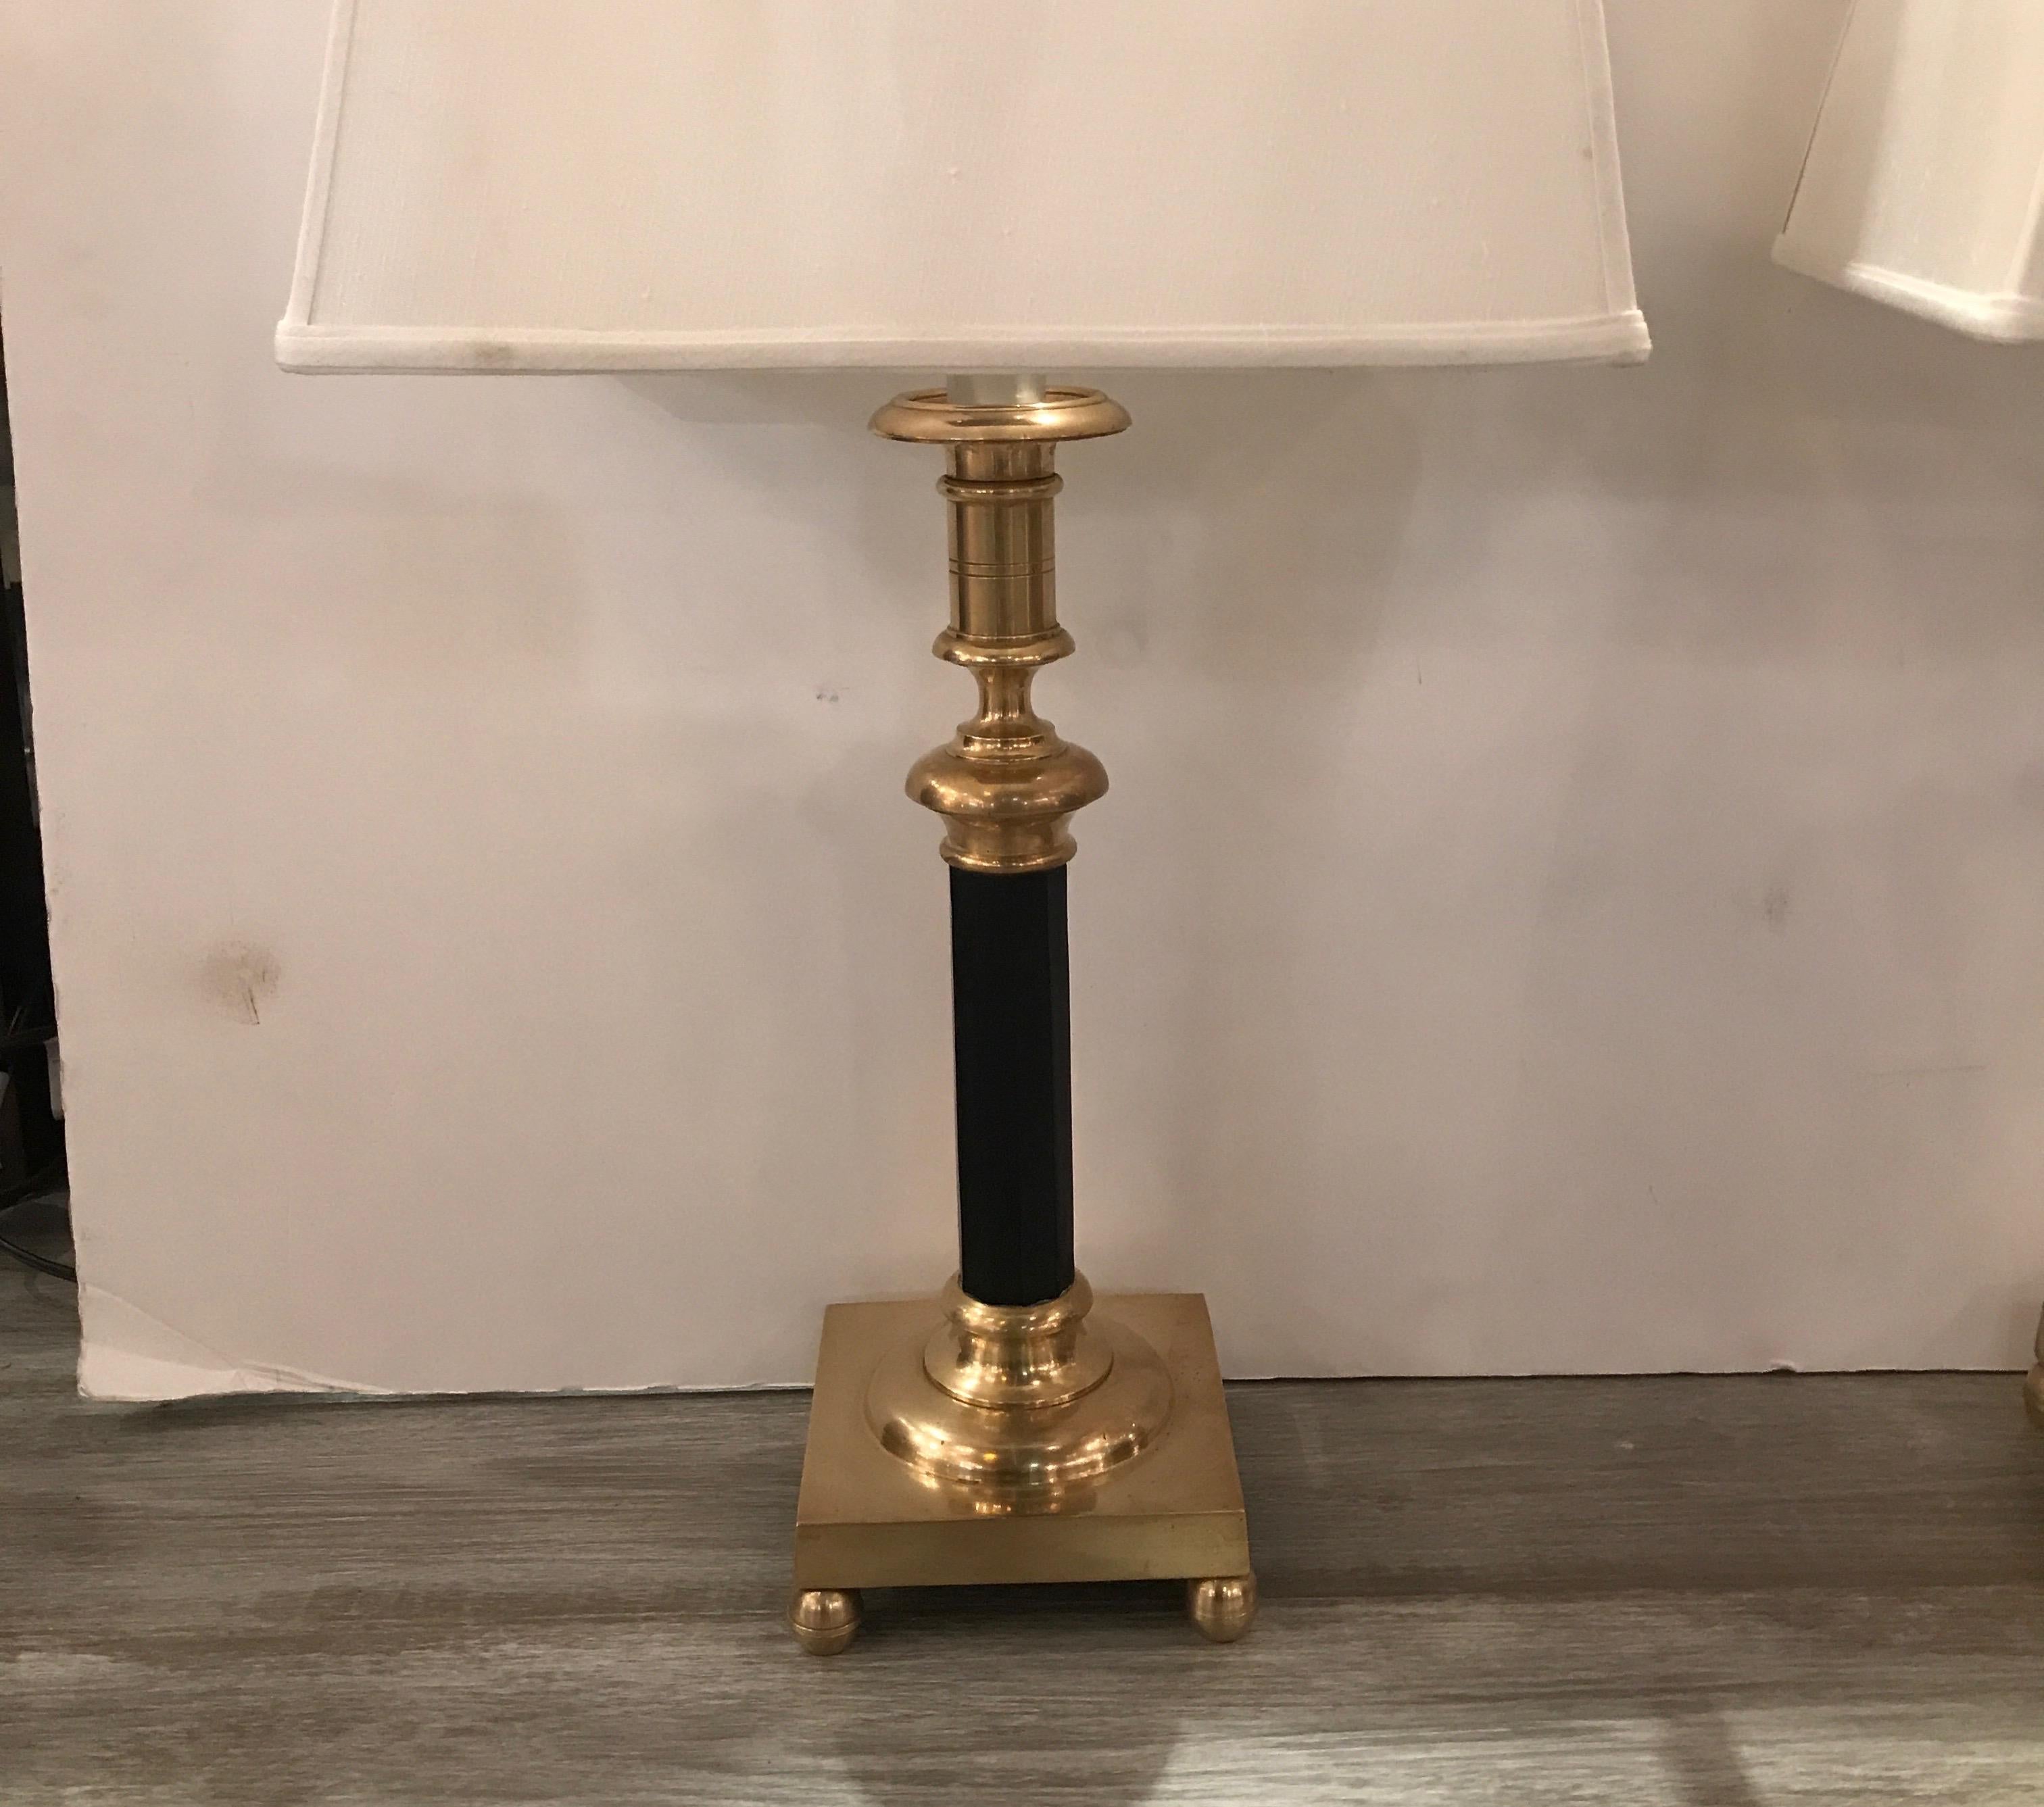 Elegant pair of solid polished brass candlestick lamps by Chapman The heavy candlestick for with black enamel column center with tall harp form finial. The lamps take 2 bulbs for extra light. The shades are for photographic purposes only and not